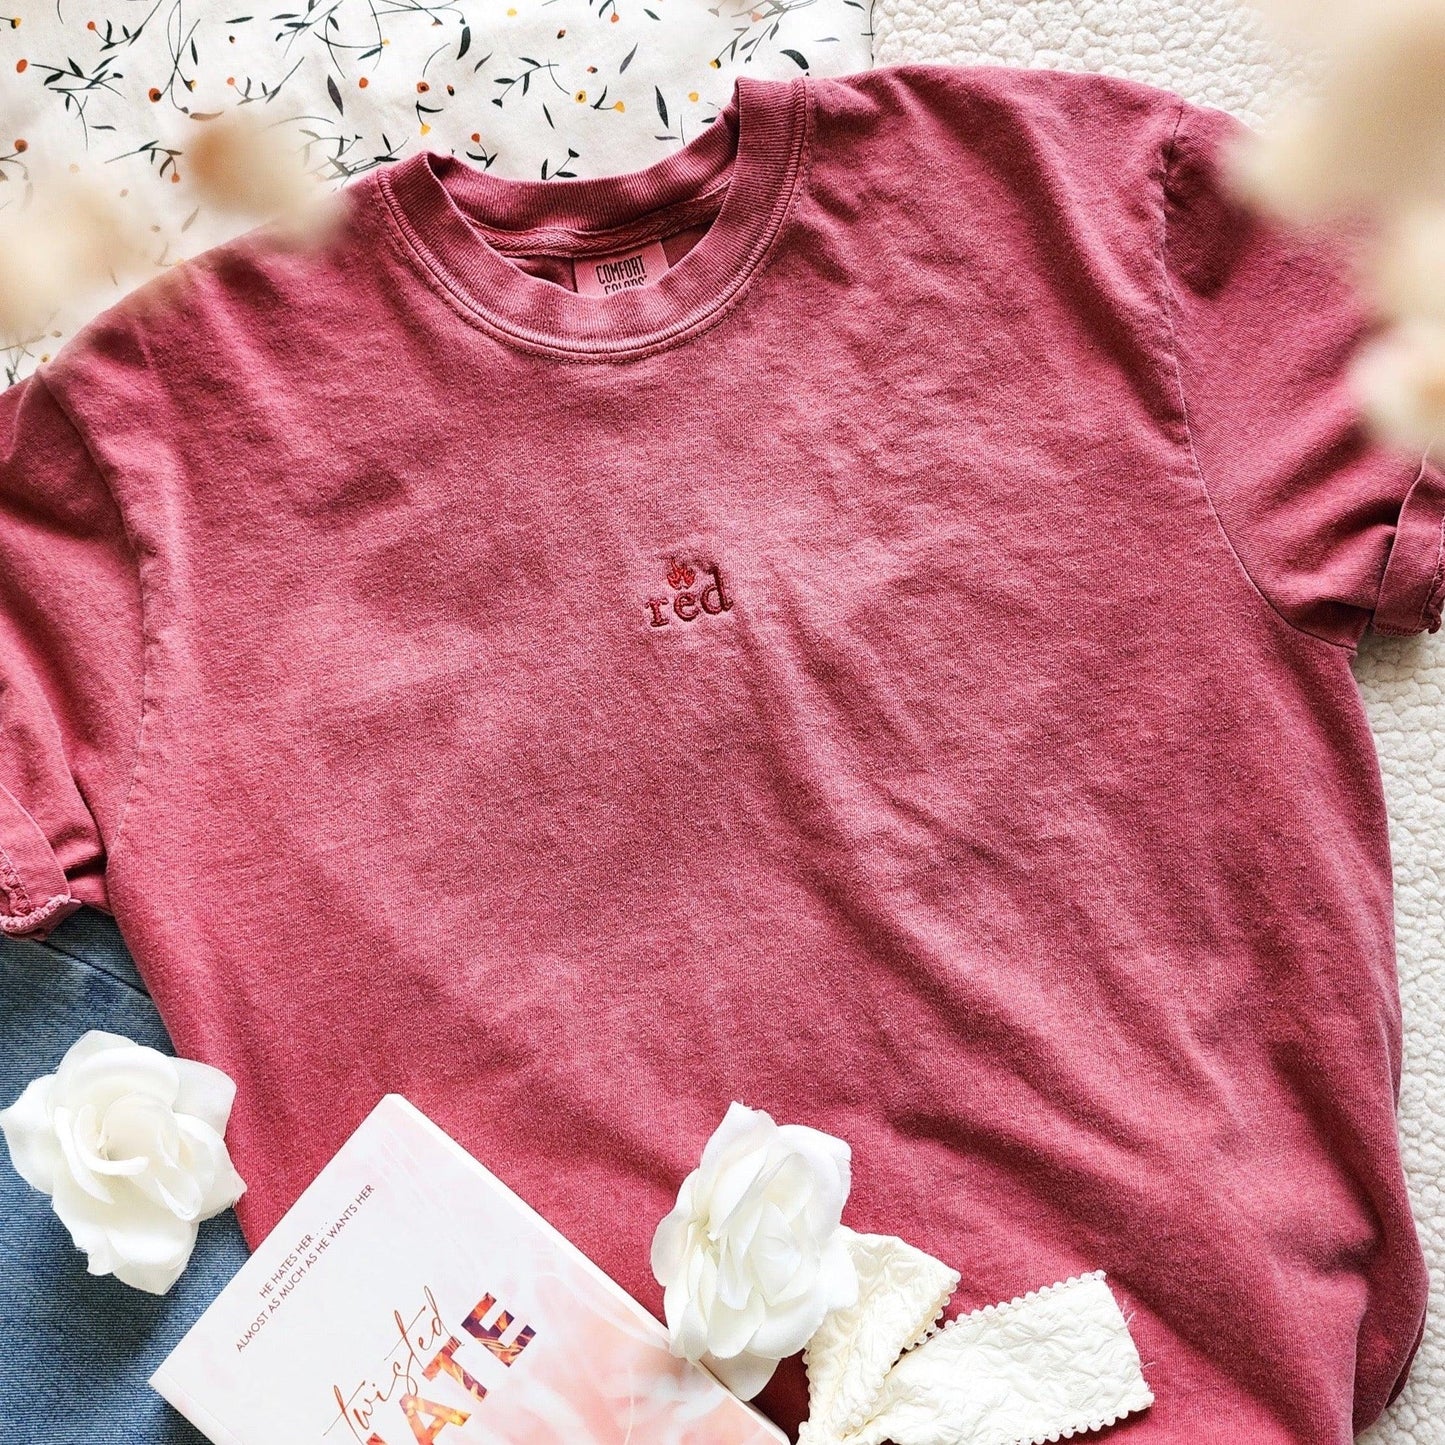 Red Embroidered T-Shirt - The Bean Workshop - ana huang, box tee, embroidered, twisted